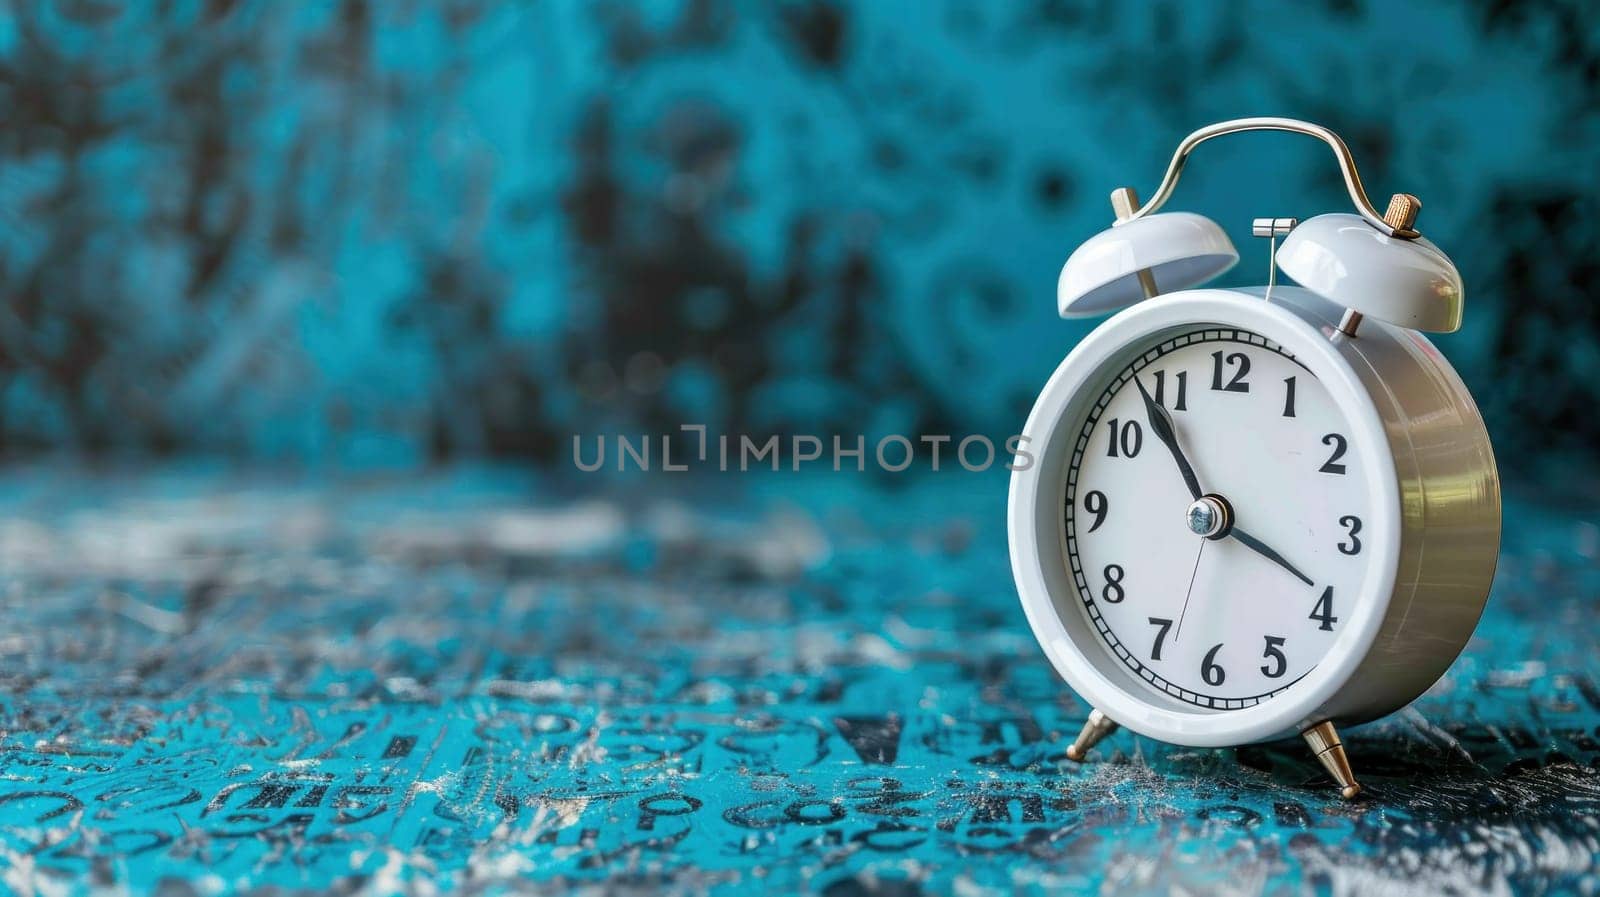 Timeline Background White Analog Alarm Clock on Calendar with Grunge Blue Background Concept Business Meeting Schedule Travel Planning and Project Milestone Reminder.